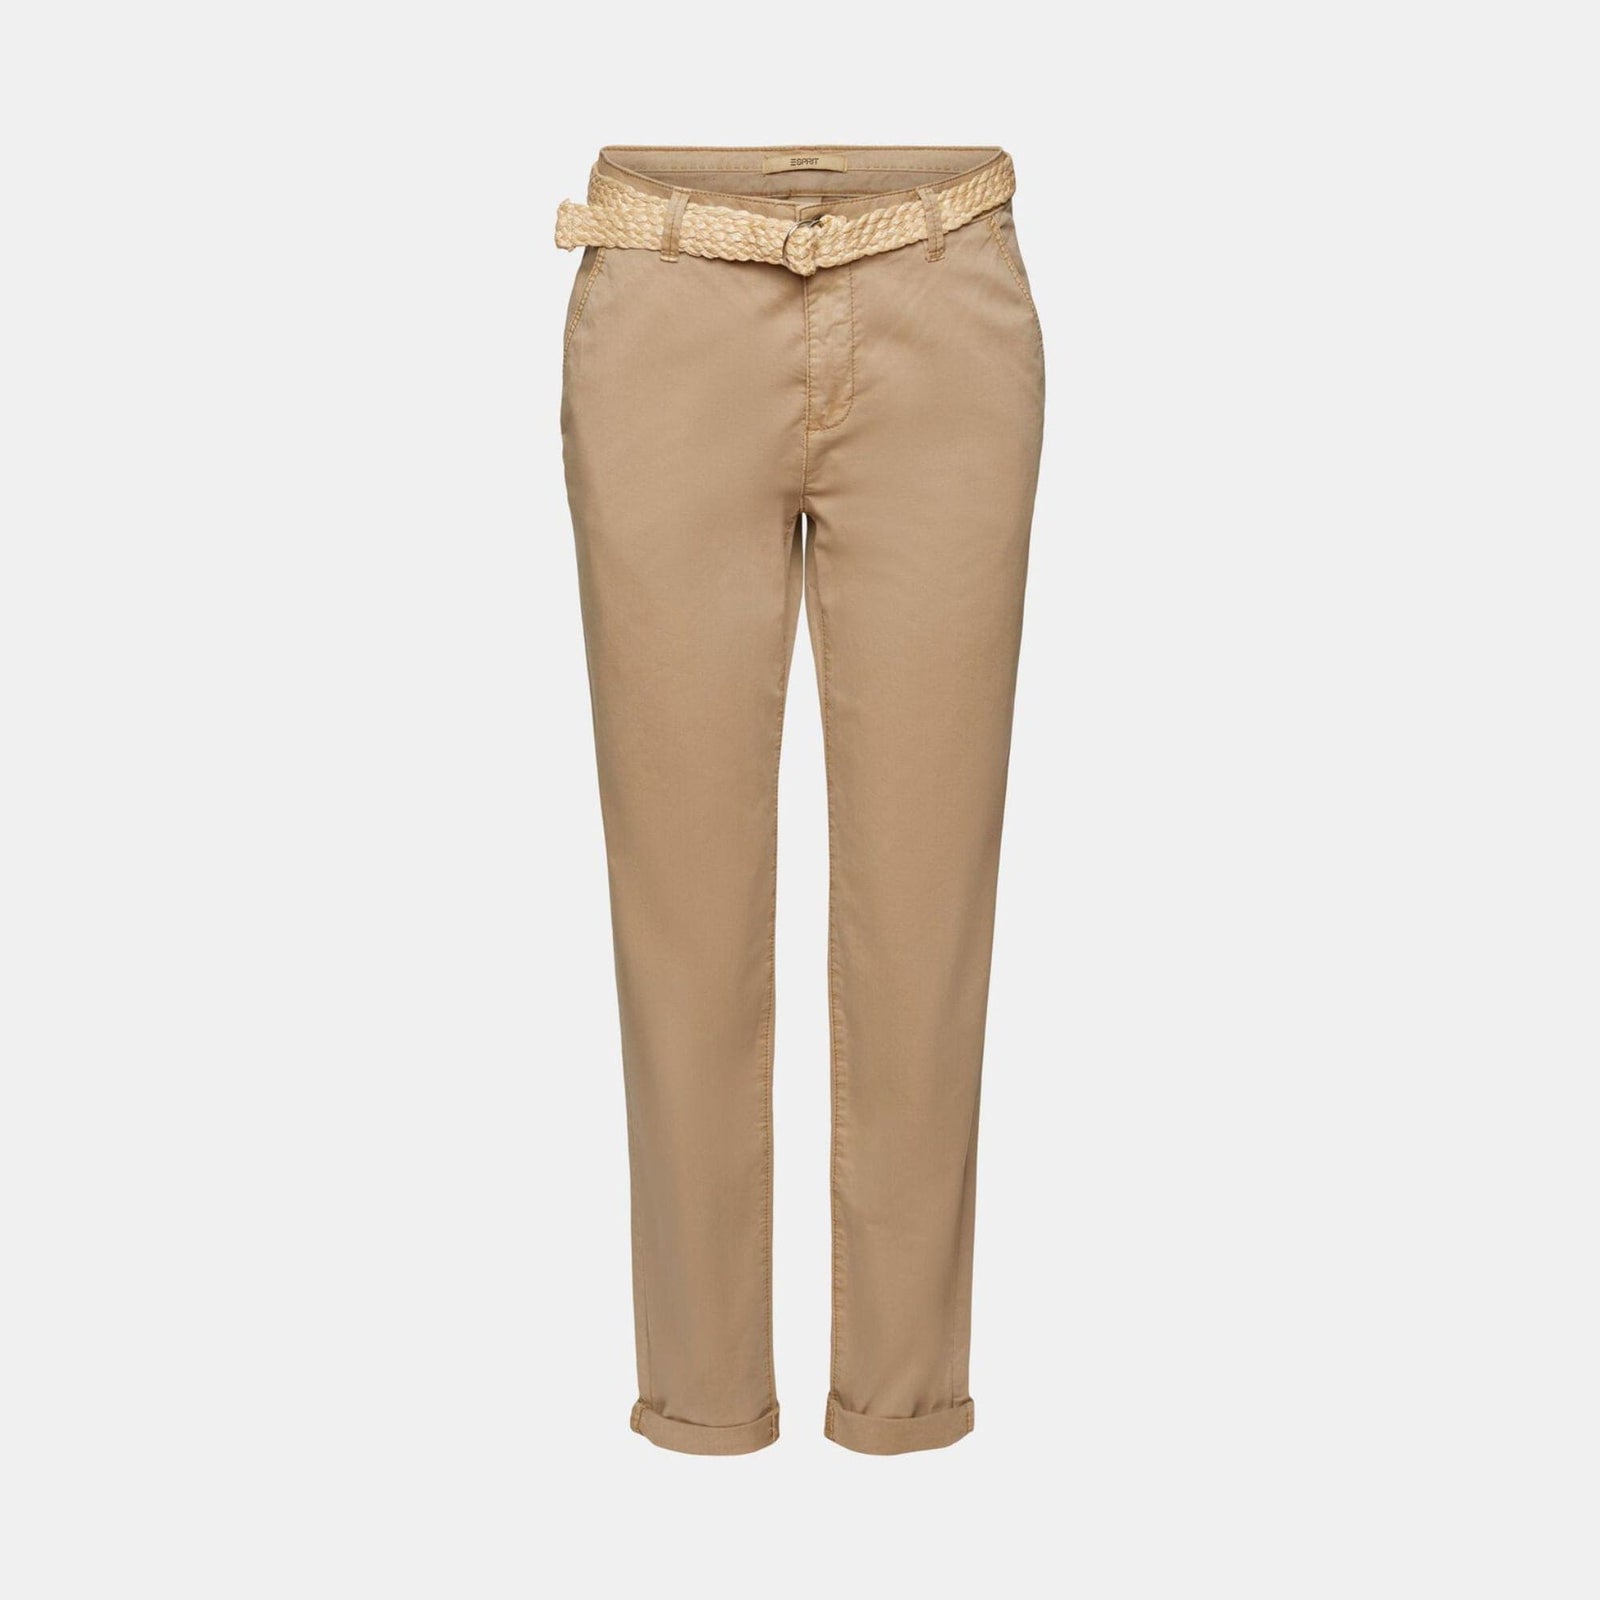 Esprit Belted Chino in Taupe